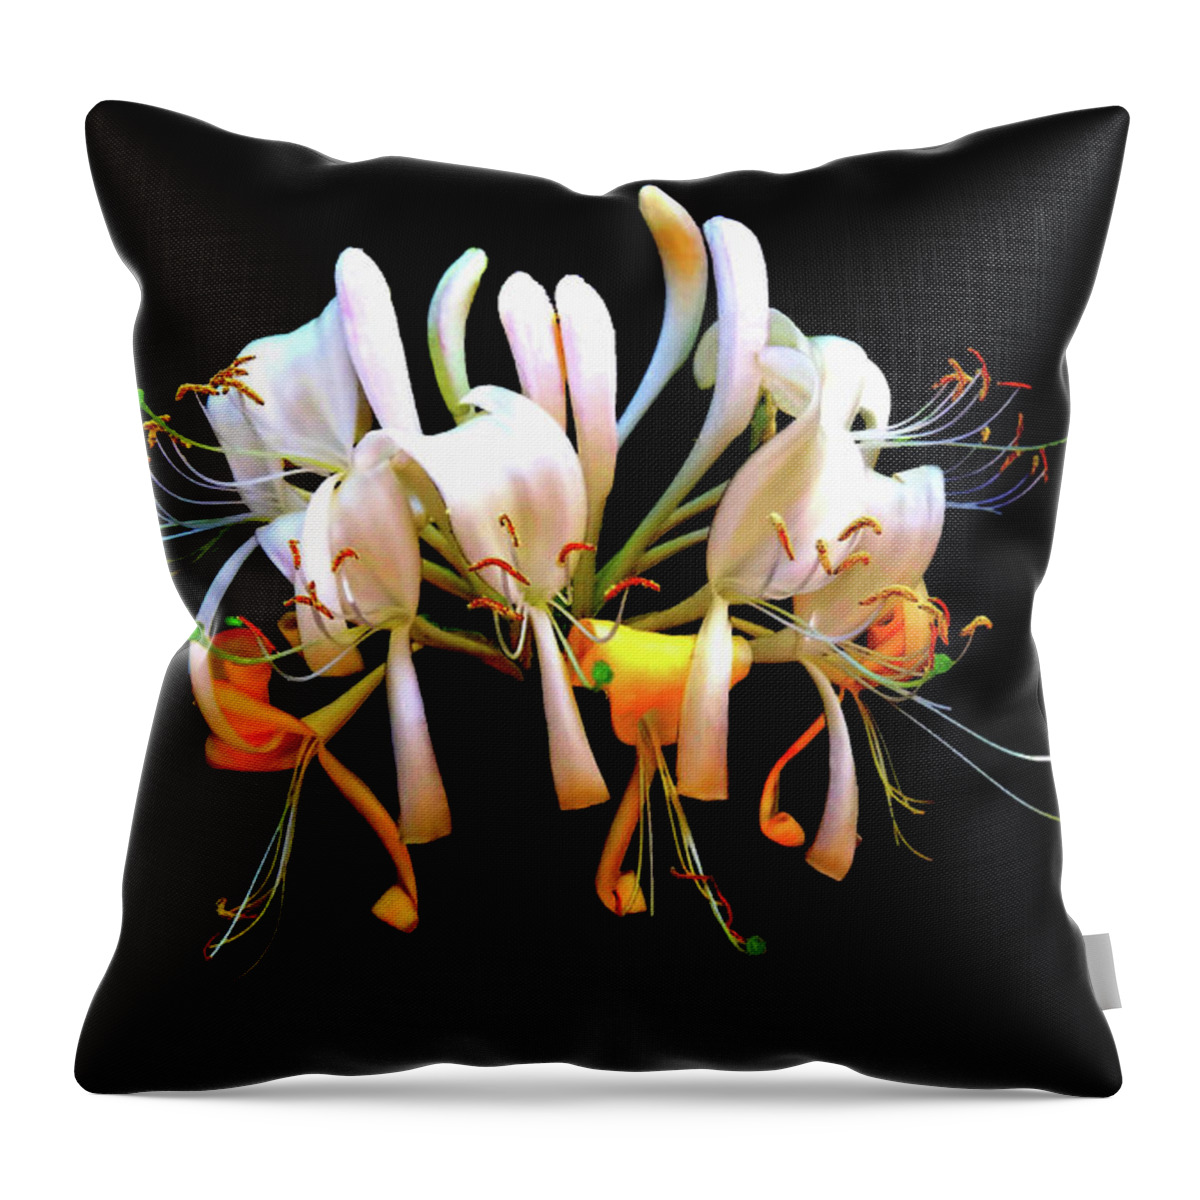 Honeysuckle Throw Pillow featuring the photograph Honeysuckle on Black by Nick Kloepping